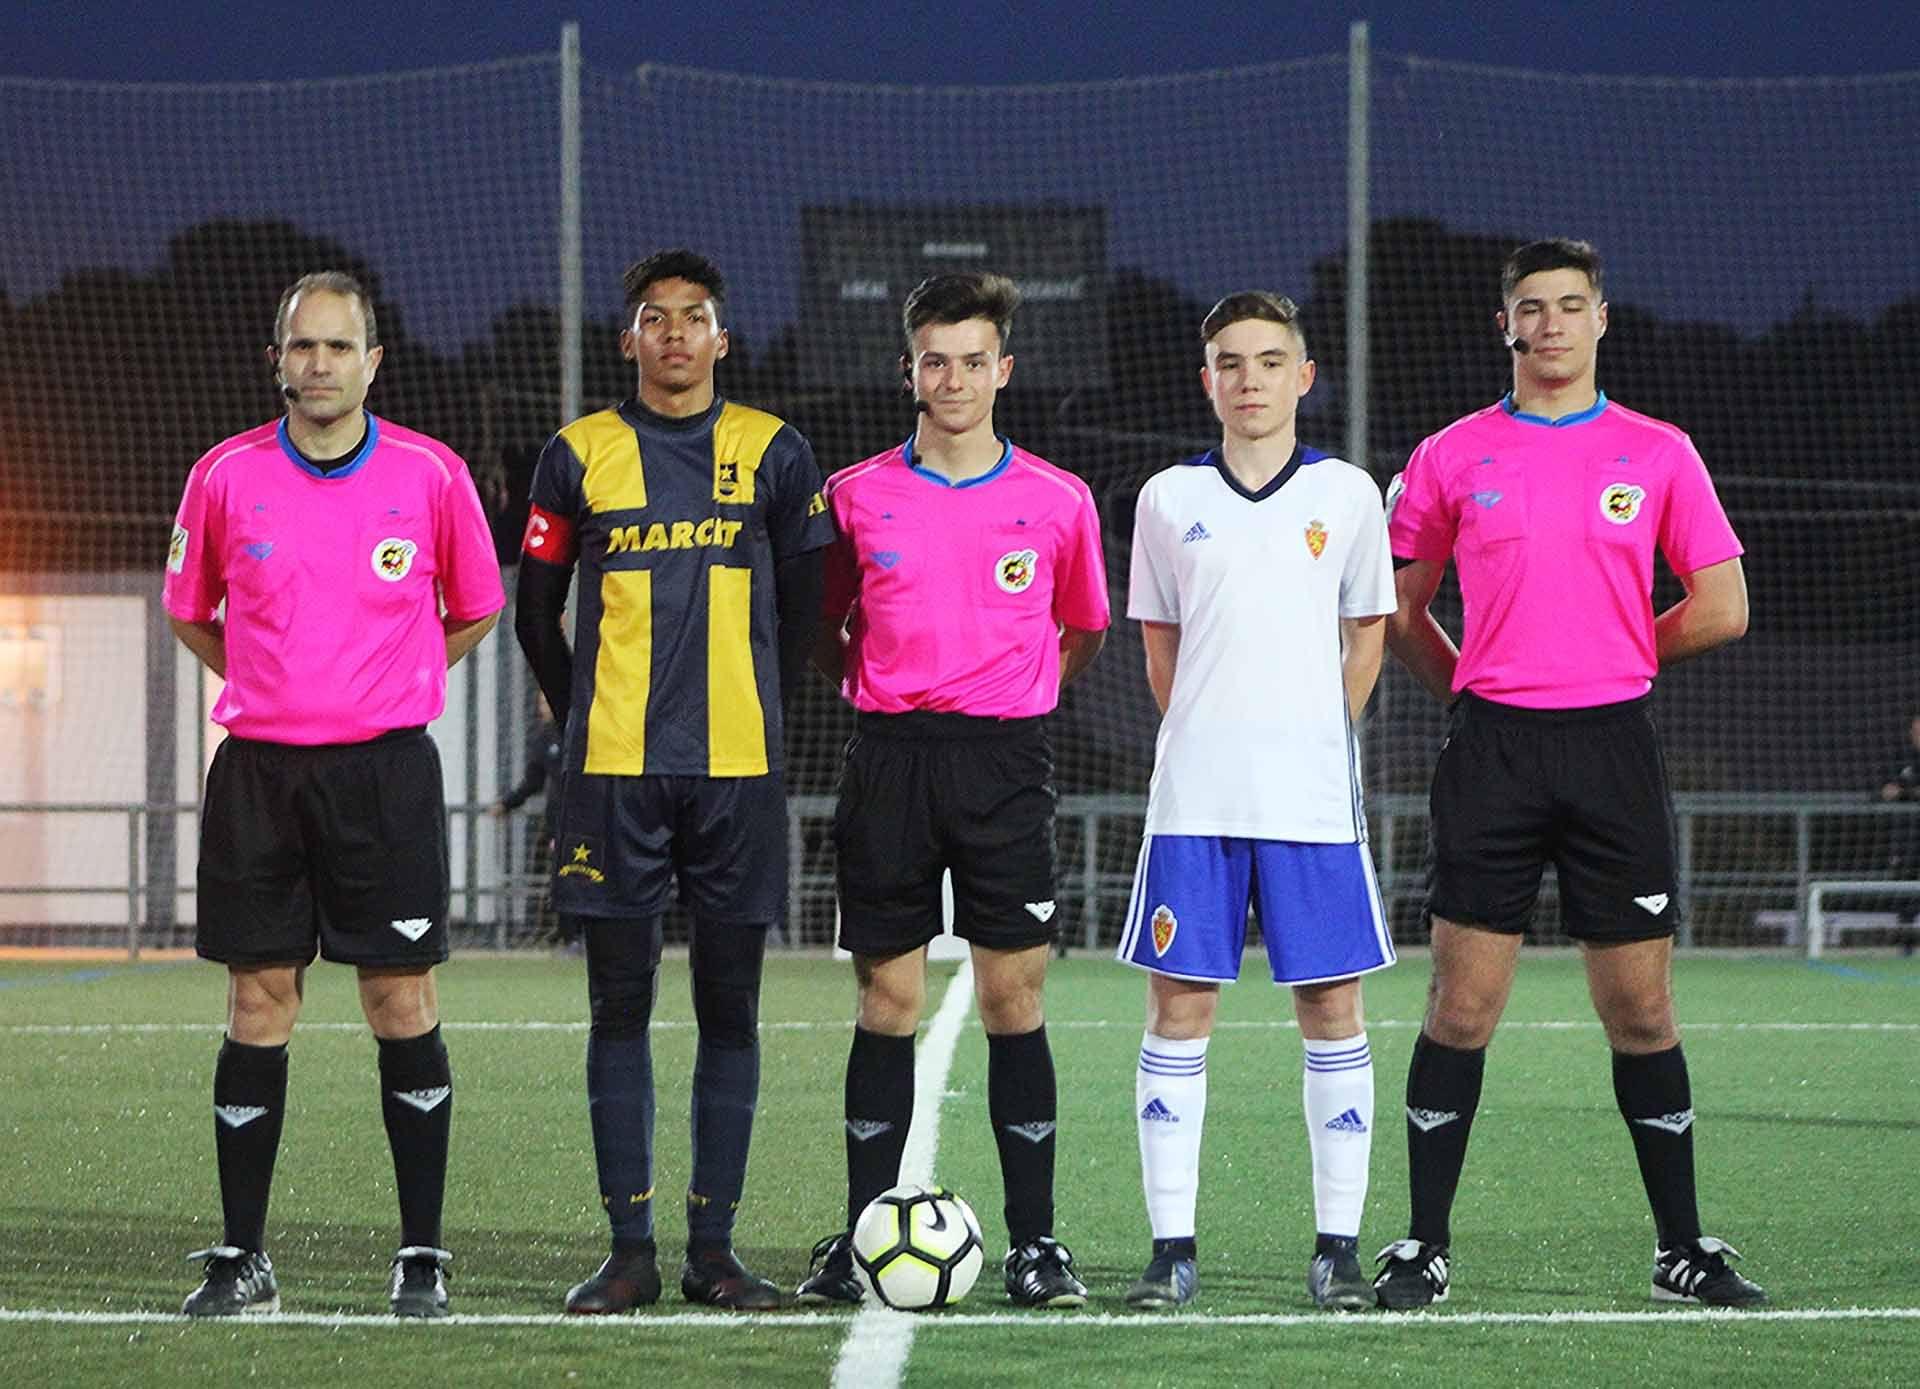 Marcet Football Academy captain stands alongside rival captain and referees before a game.